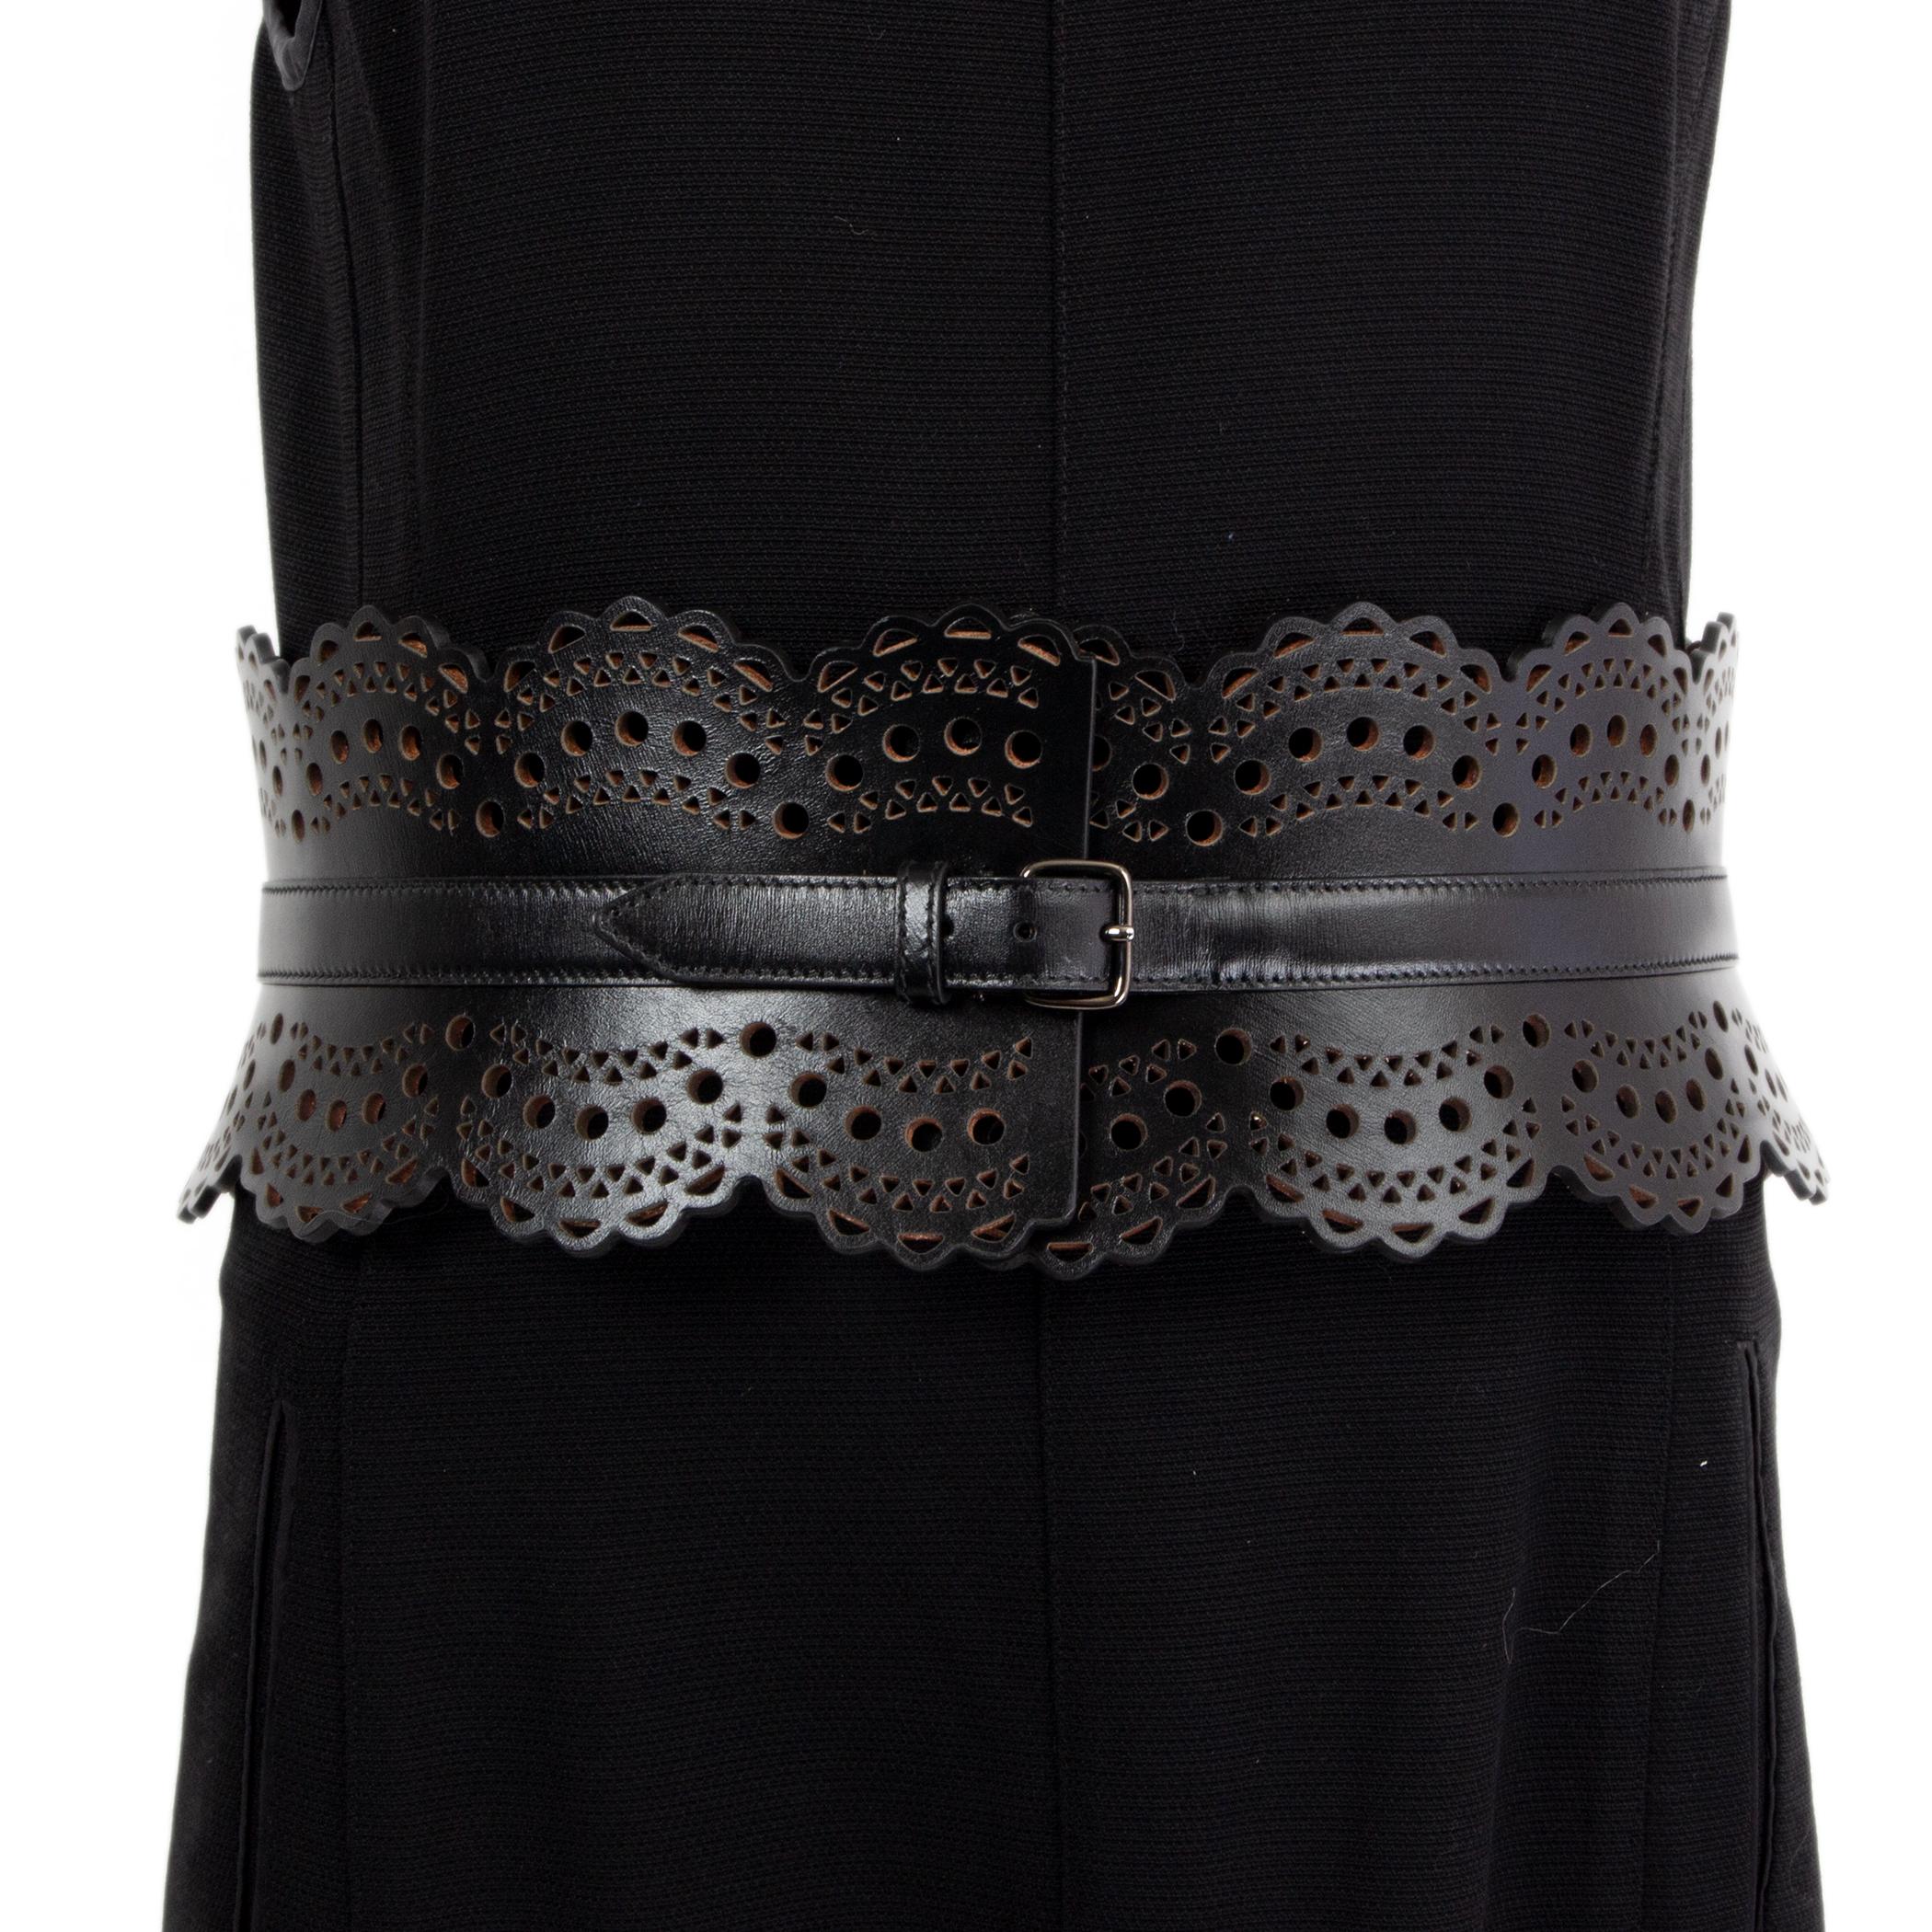 ALAIA black leather PERFORATED WIDE WAIST CORSET Belt 85 1